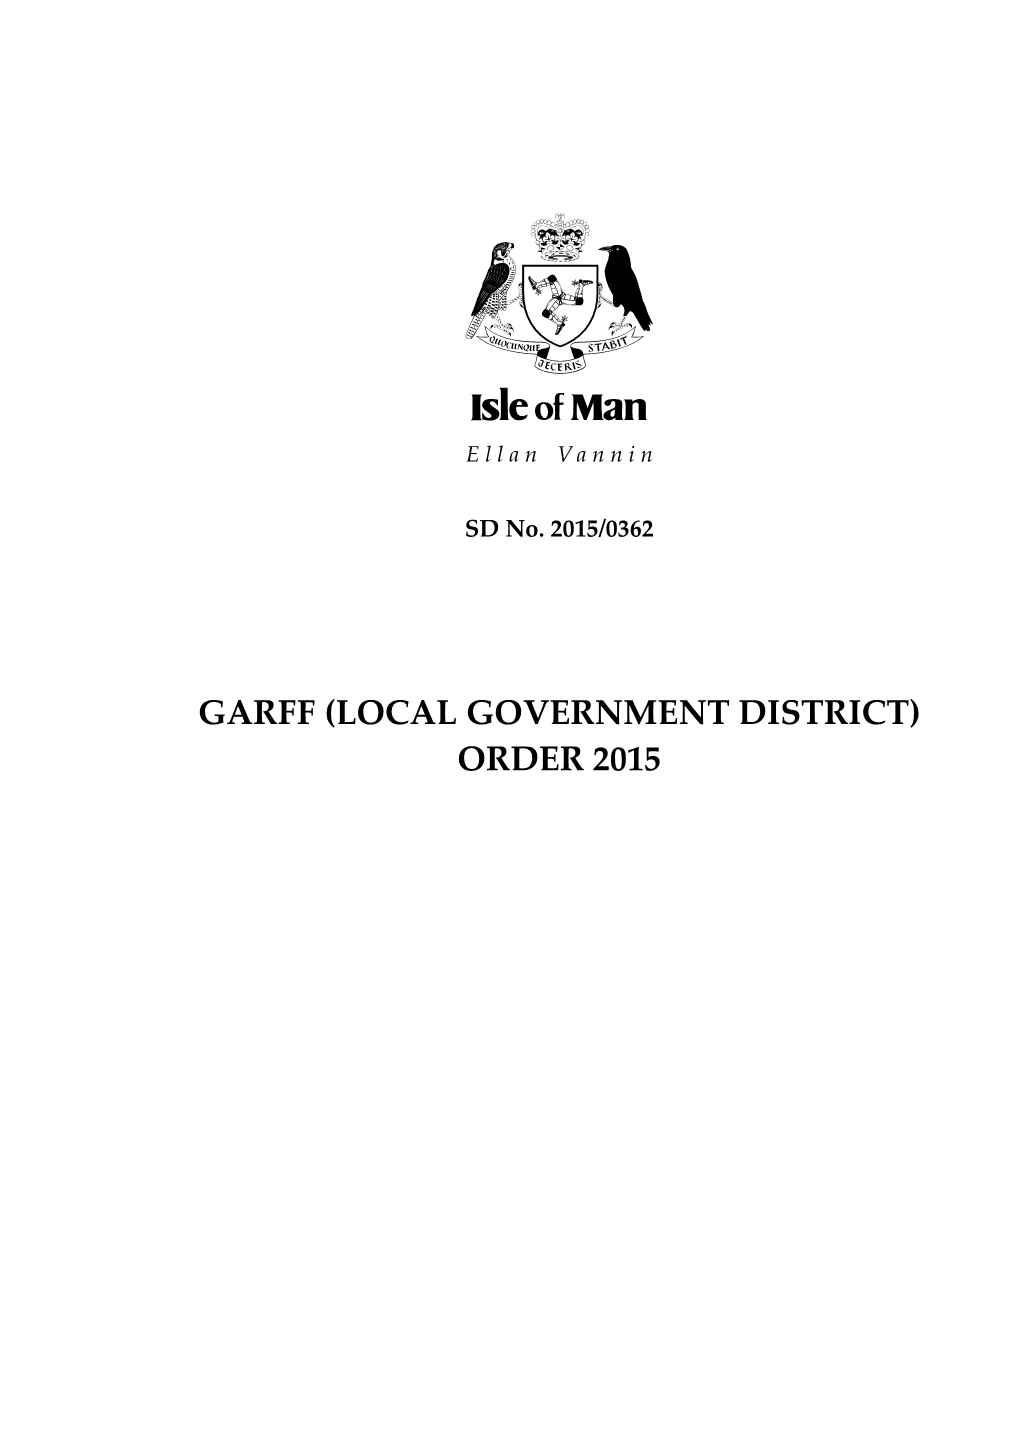 (Local Government District) Order 2015